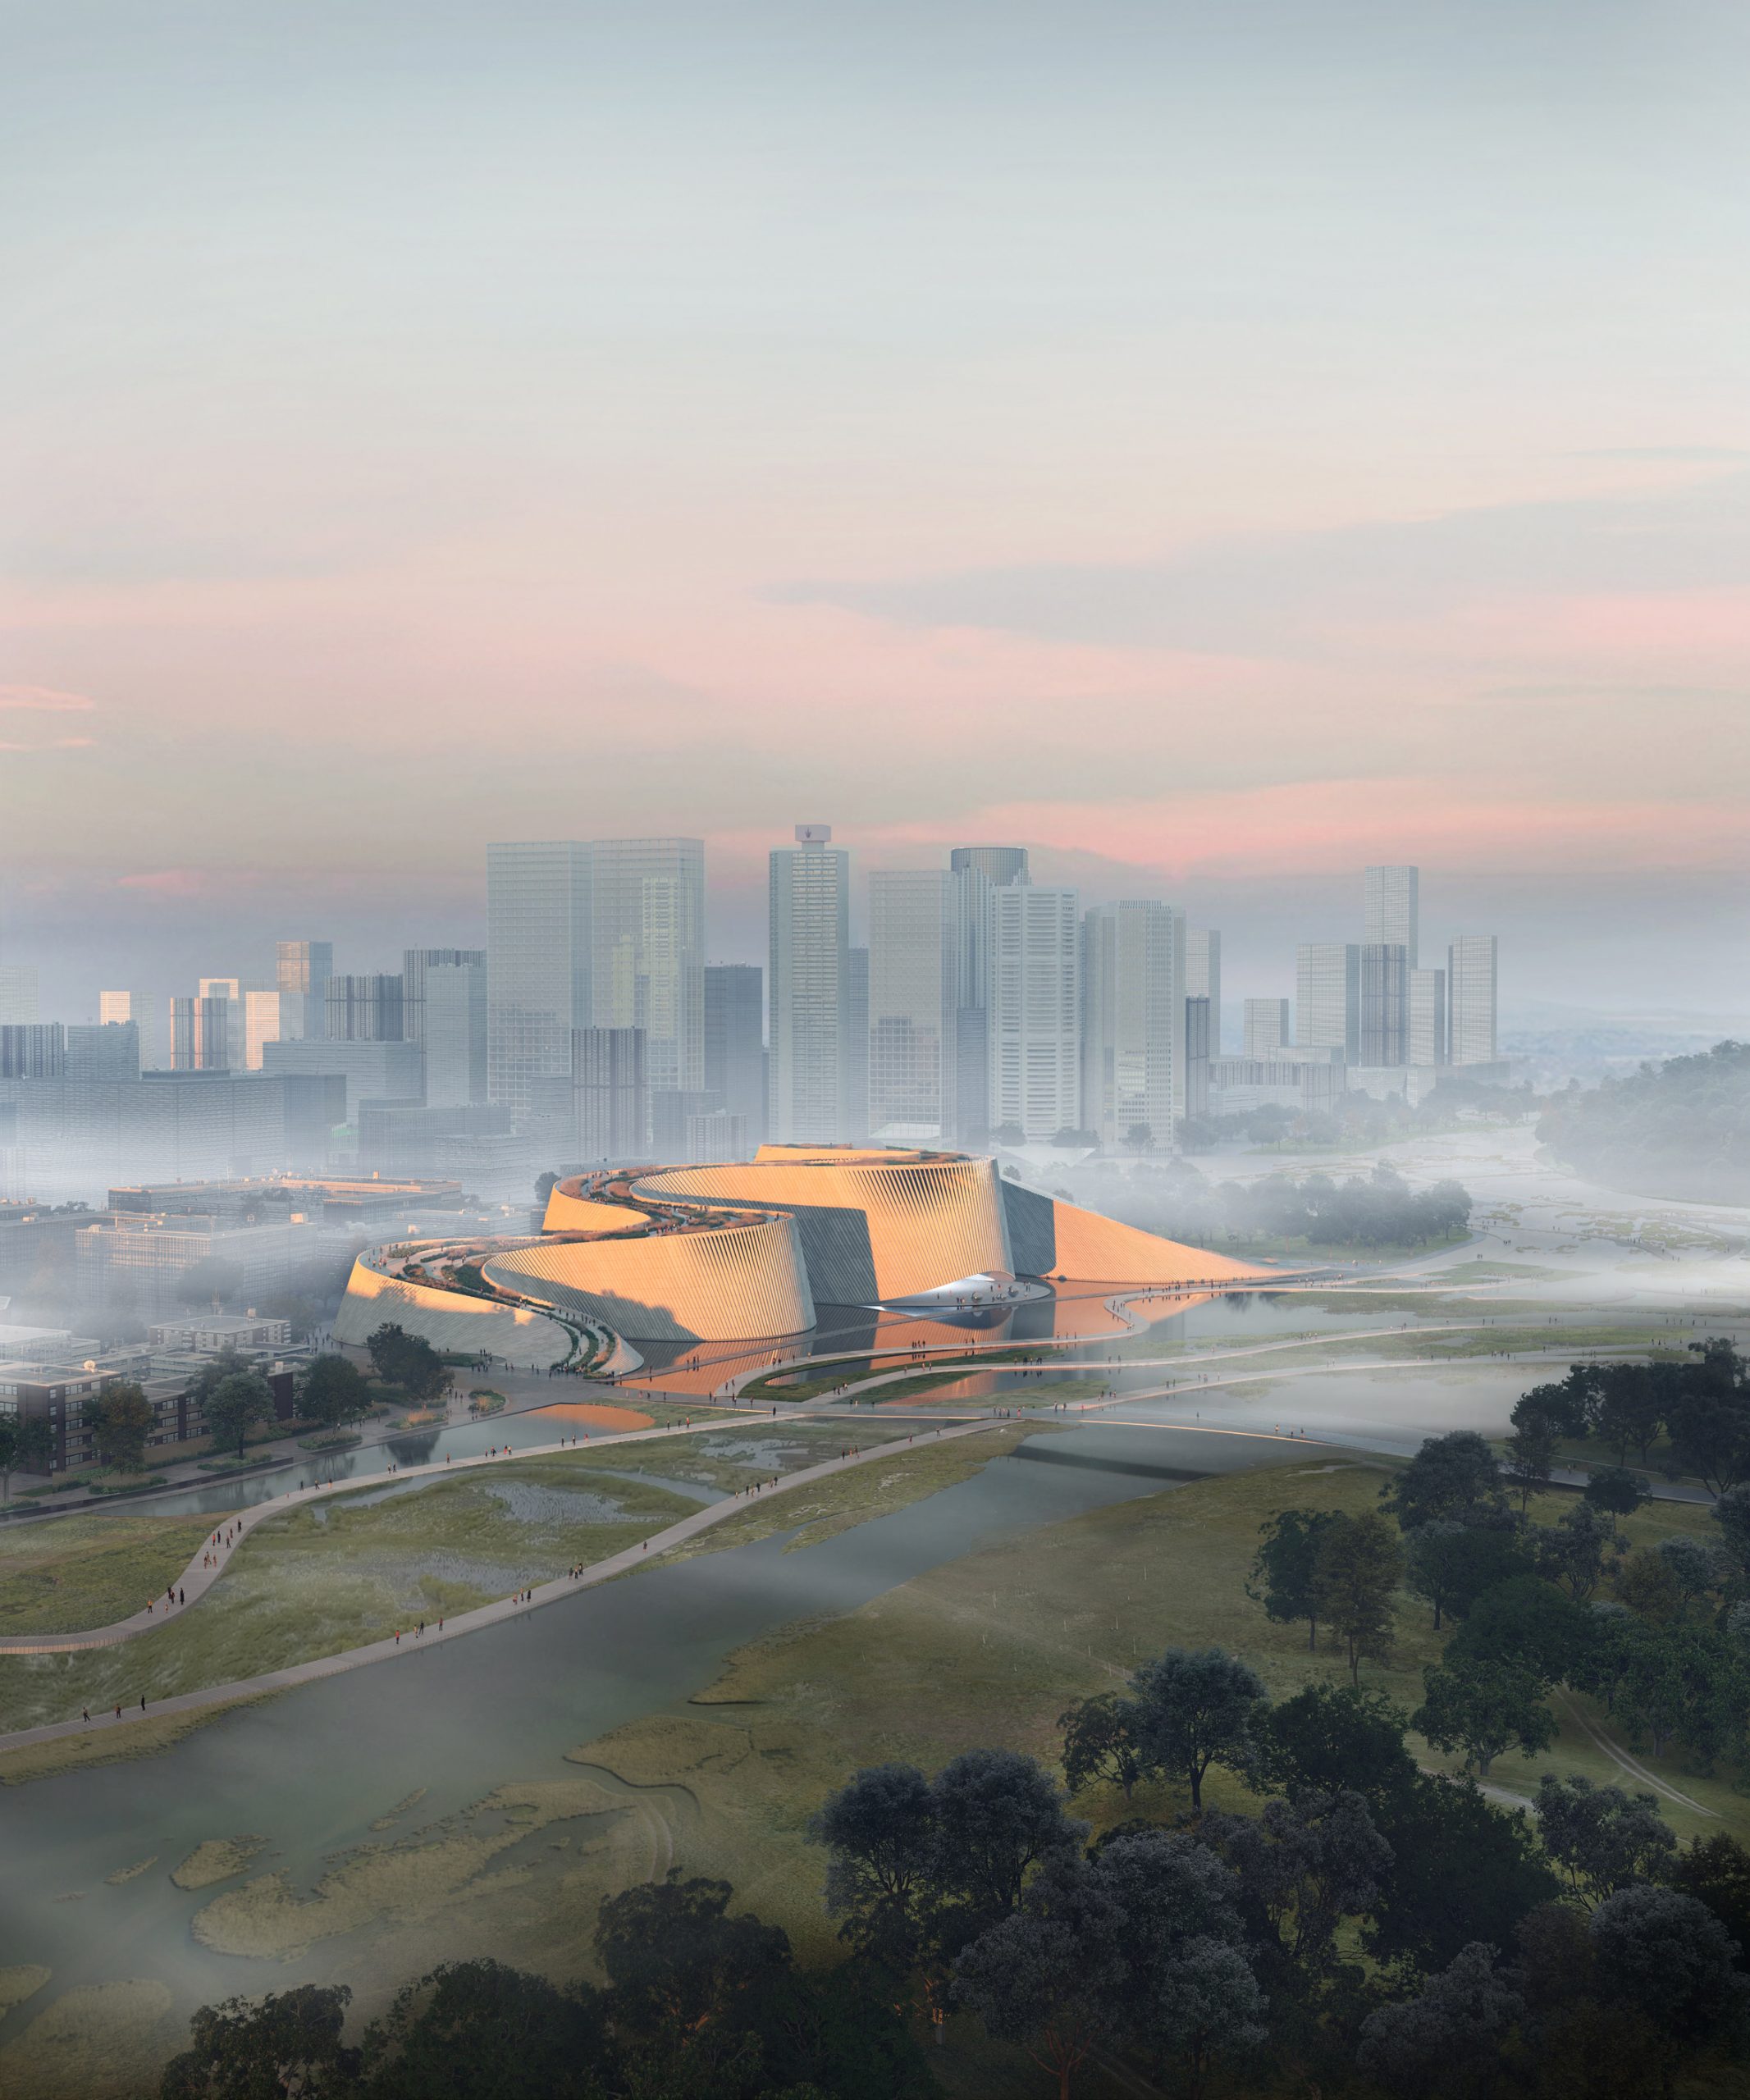 Shenzhen Natural History Museum by B+H, 3XN and Zhubo Design